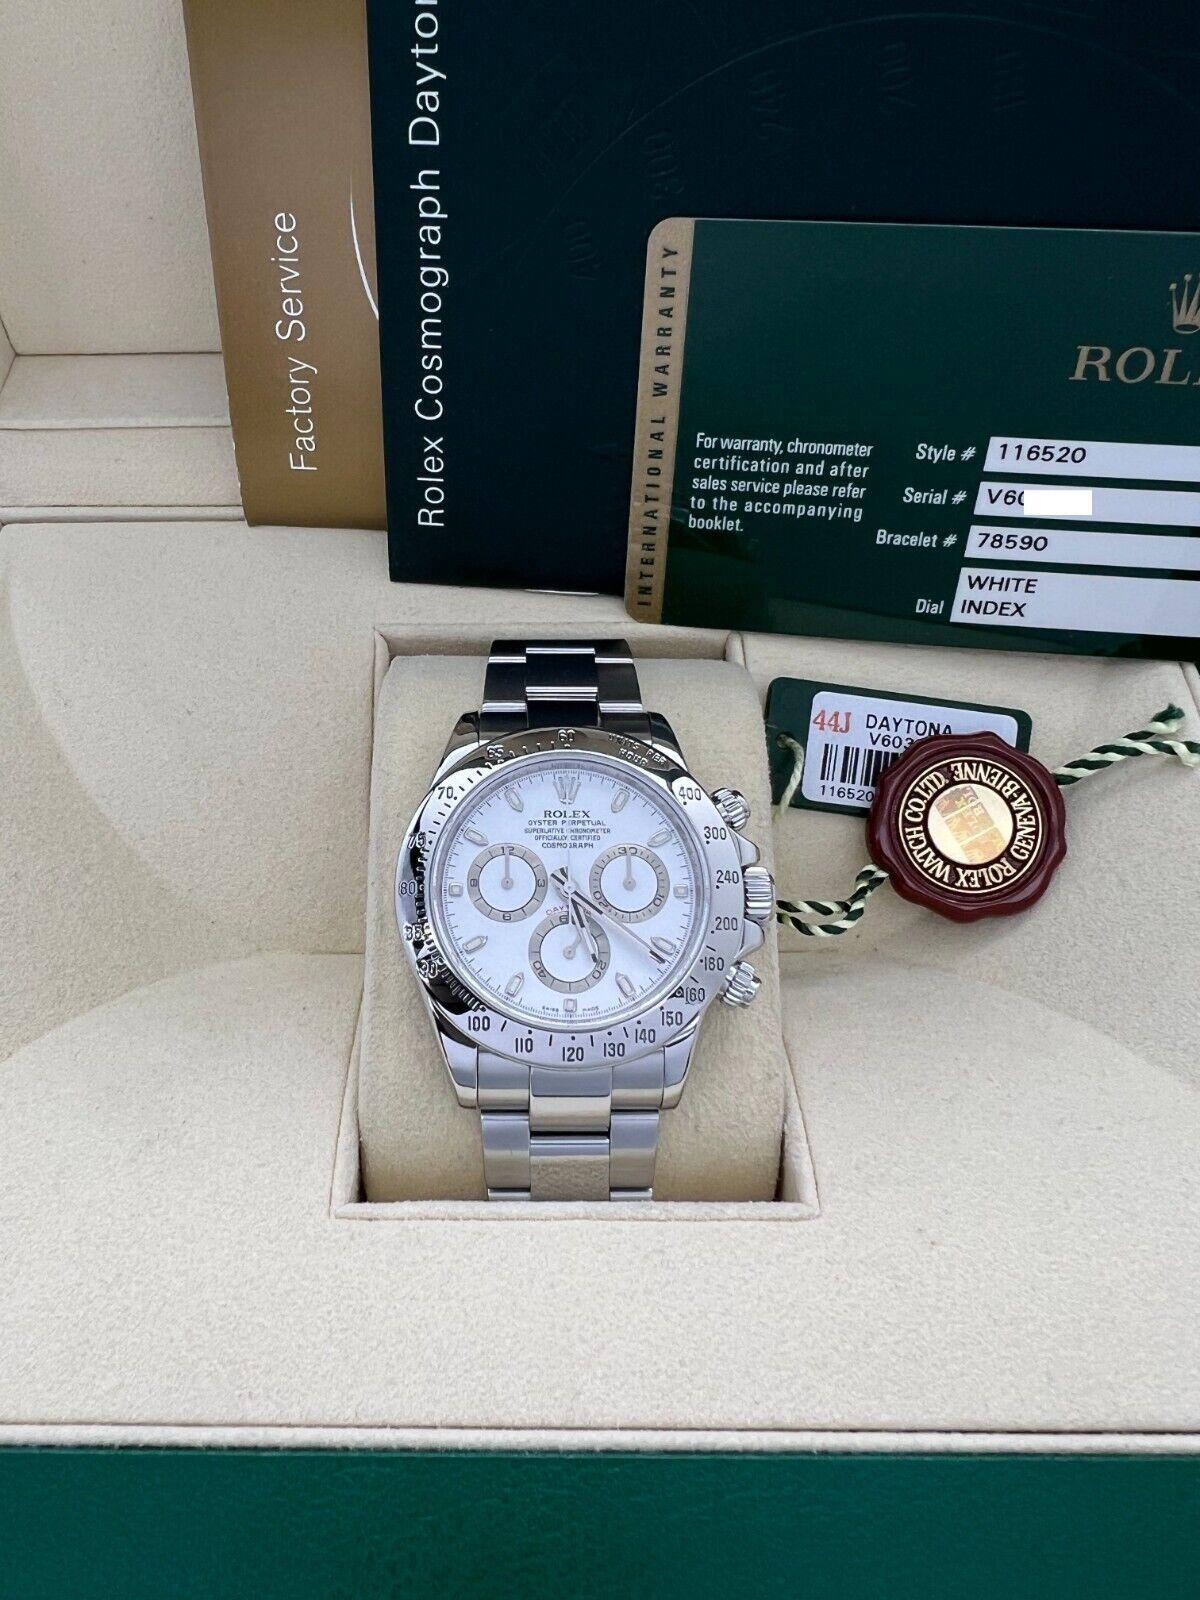 Rolex 116520 Daytona White Dial Stainless Steel Box Paper OPEN CARD 2